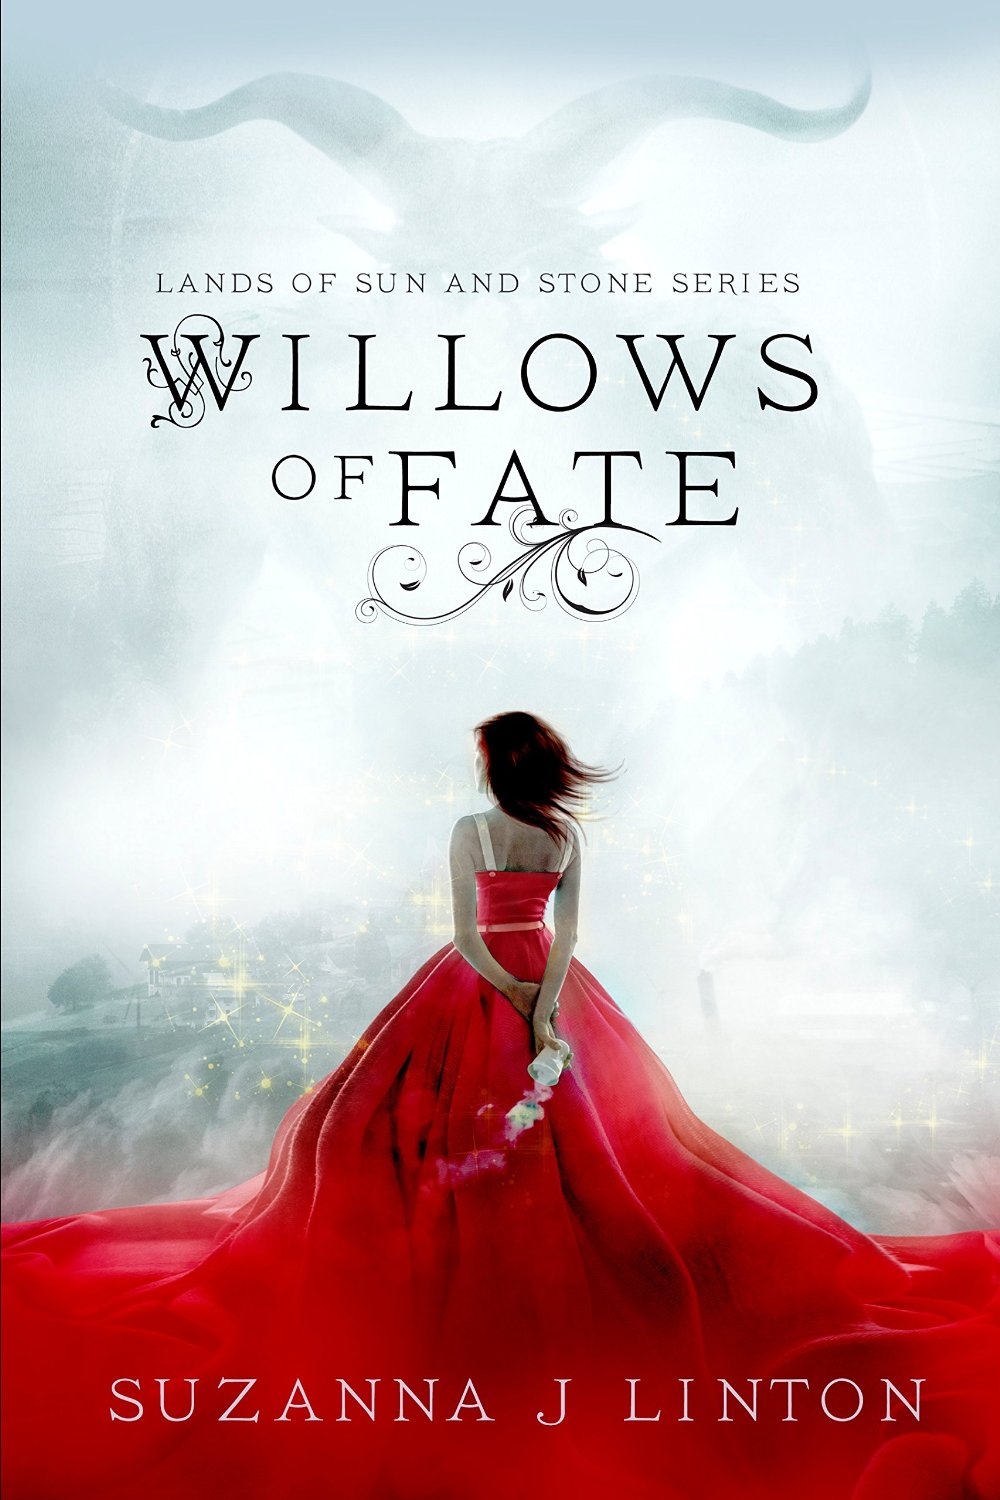 Willows of Fate (The Lands of Sun and Stone Series Book 1) by Suzanna J Linton